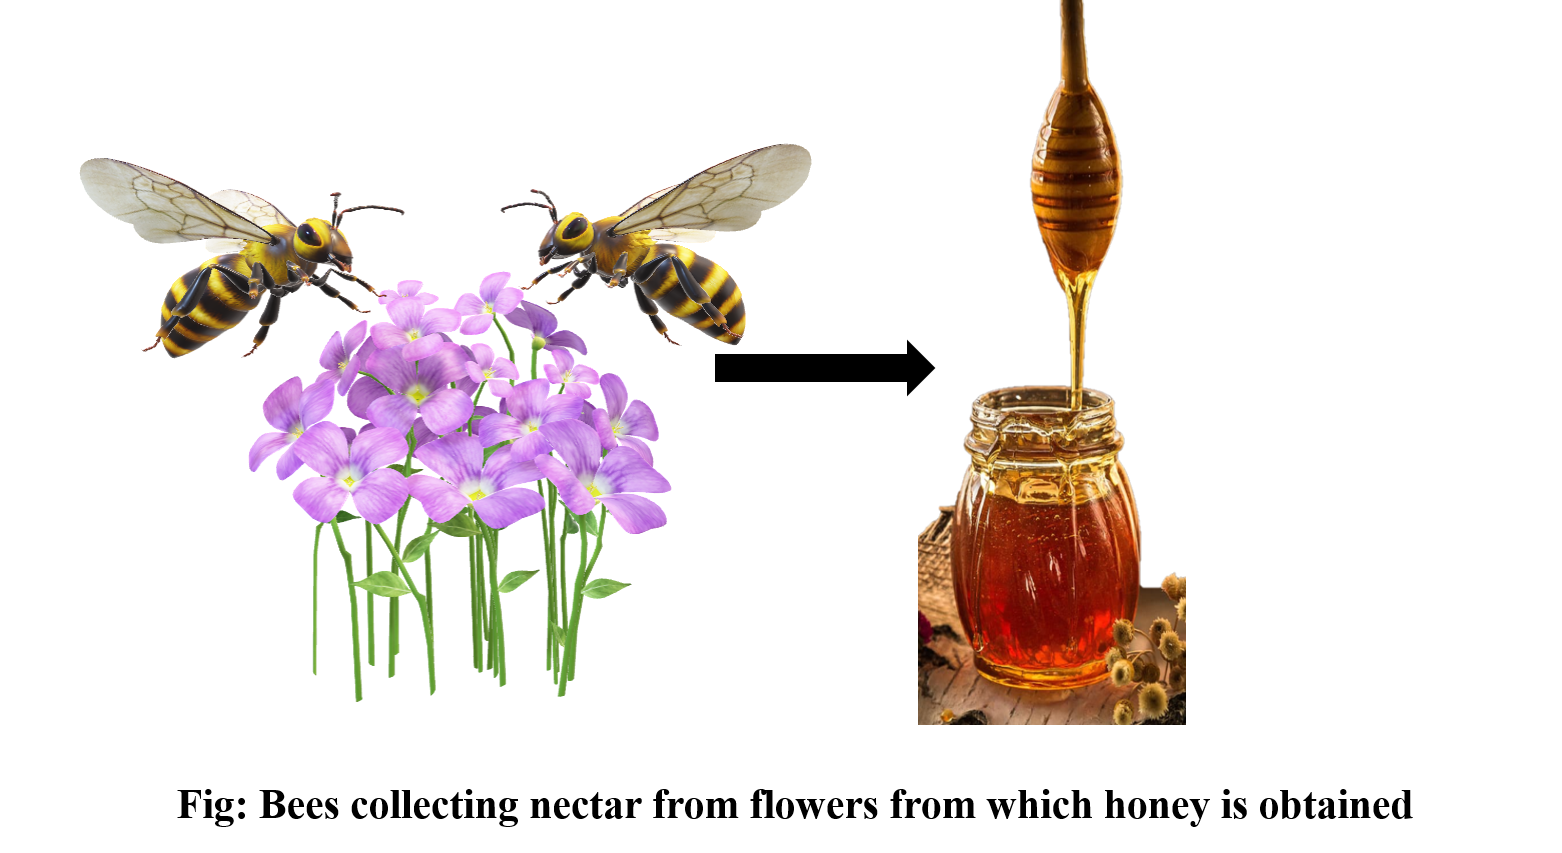 Domestication of the honey bee is called as(a)Sericulture(b)Apiculture(c)Tissue  culture(d)Pisciculture